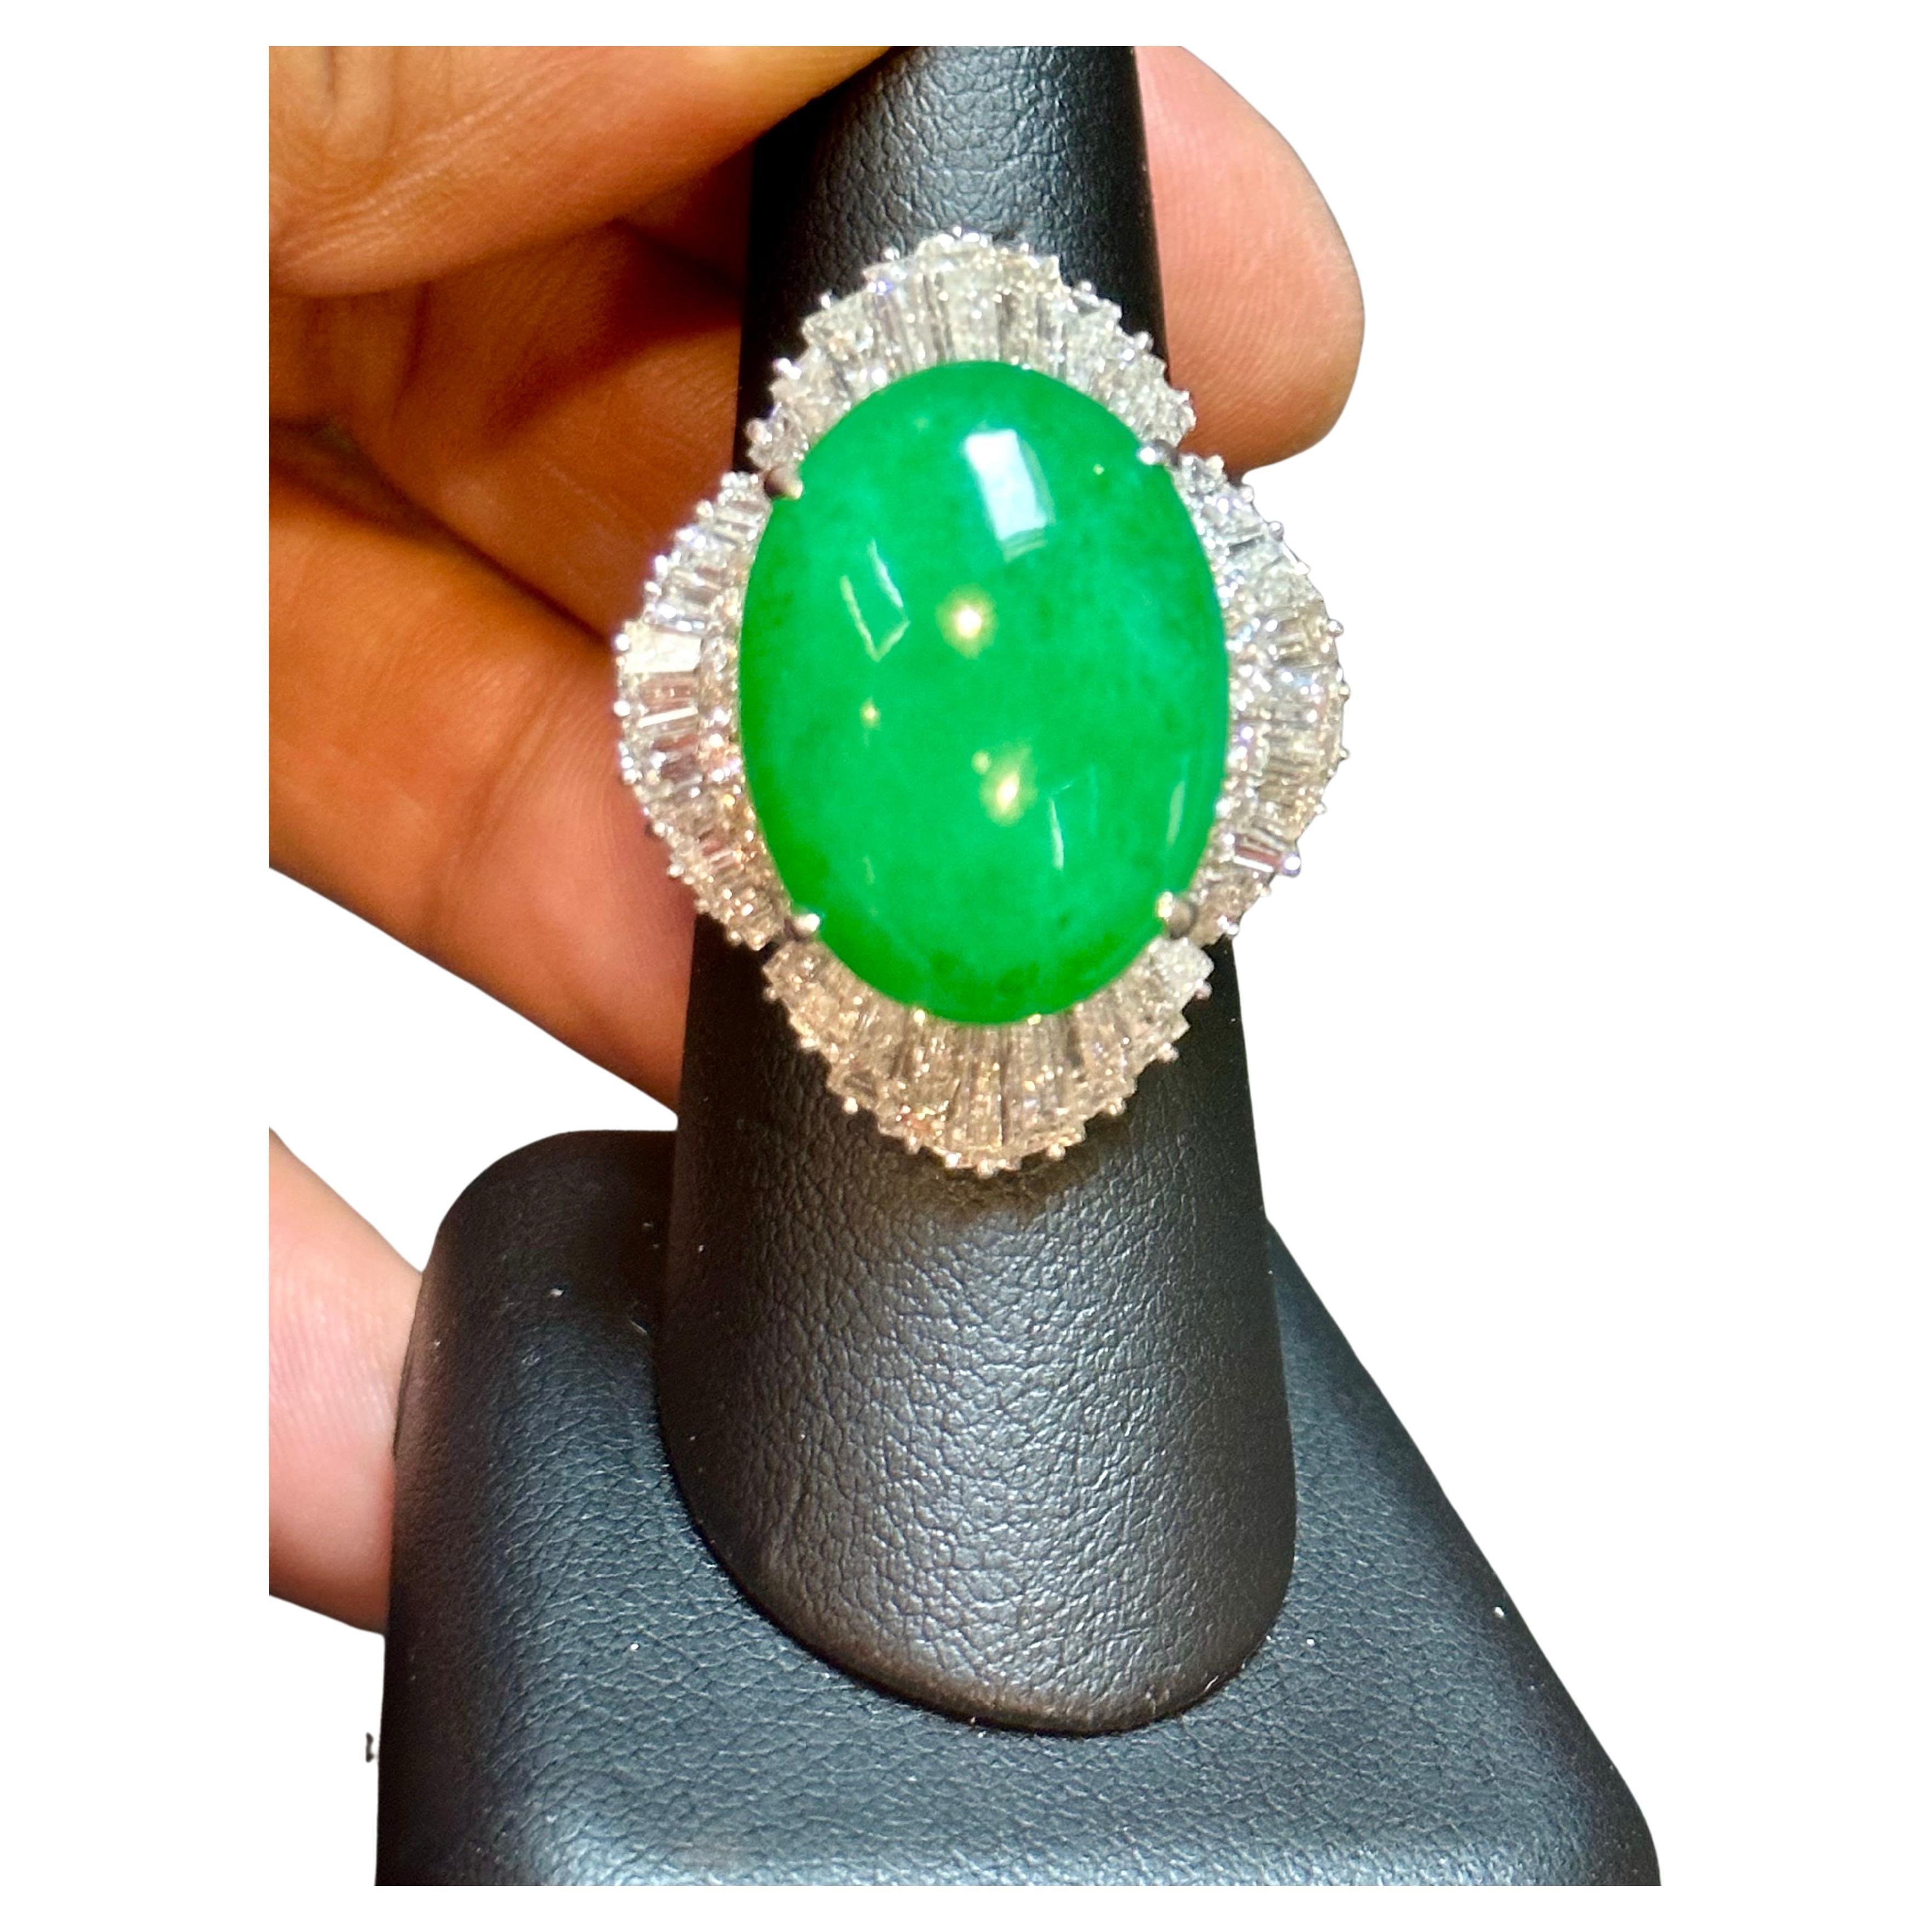 GIA Certified approximately 23to 25 Carat Jadeite Jade +4.5Ct Diamond Cocktail Ring Platinum Estate
This jade ring has two certificates , one by GIA and other one is by Hongkong Jade & Stone Laboratory Limited 
GIA Report # 6223505372, Double